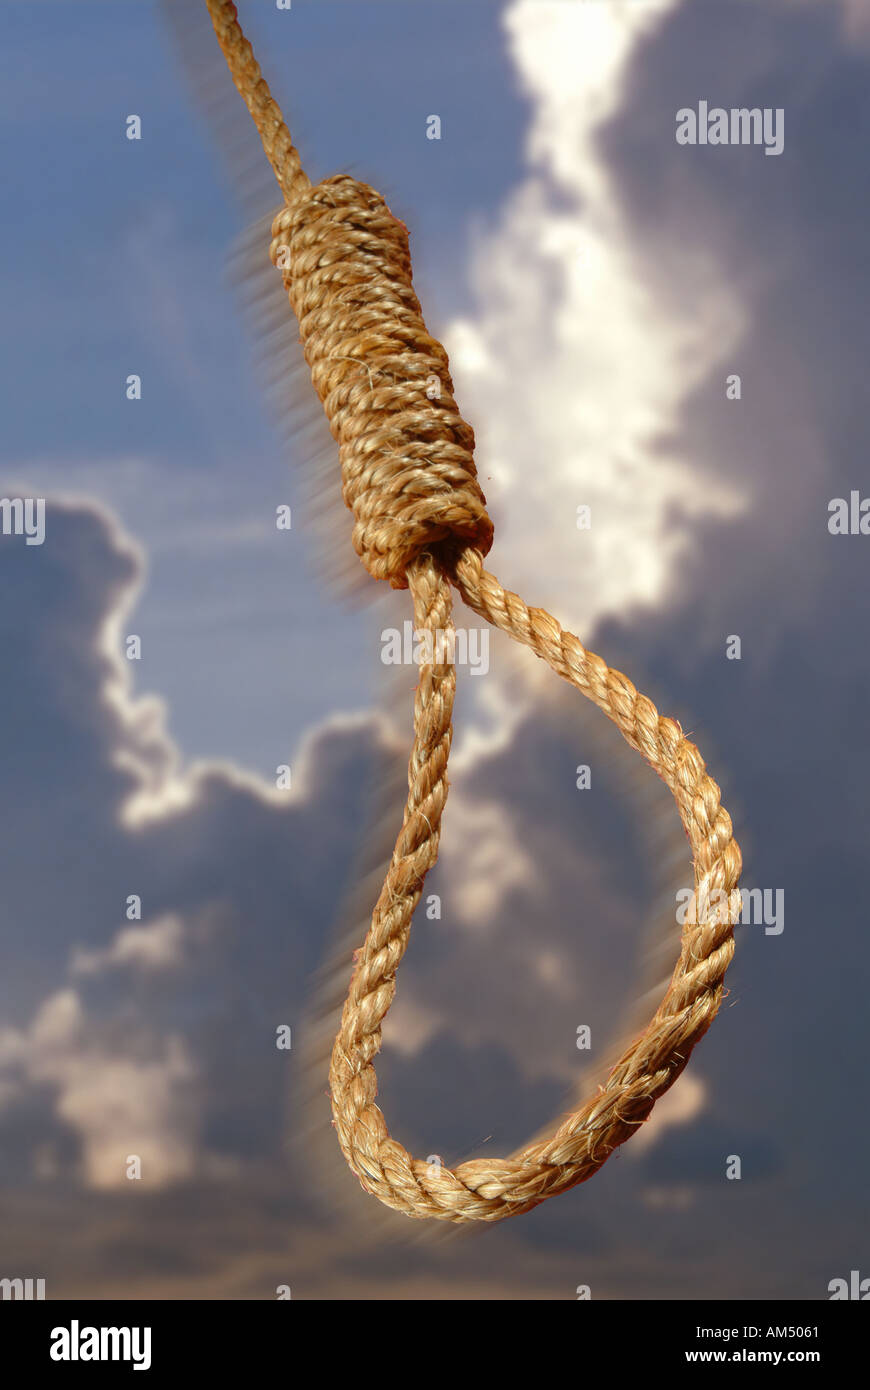 A rope tied into a swinging hangmans noose. Stock Photo